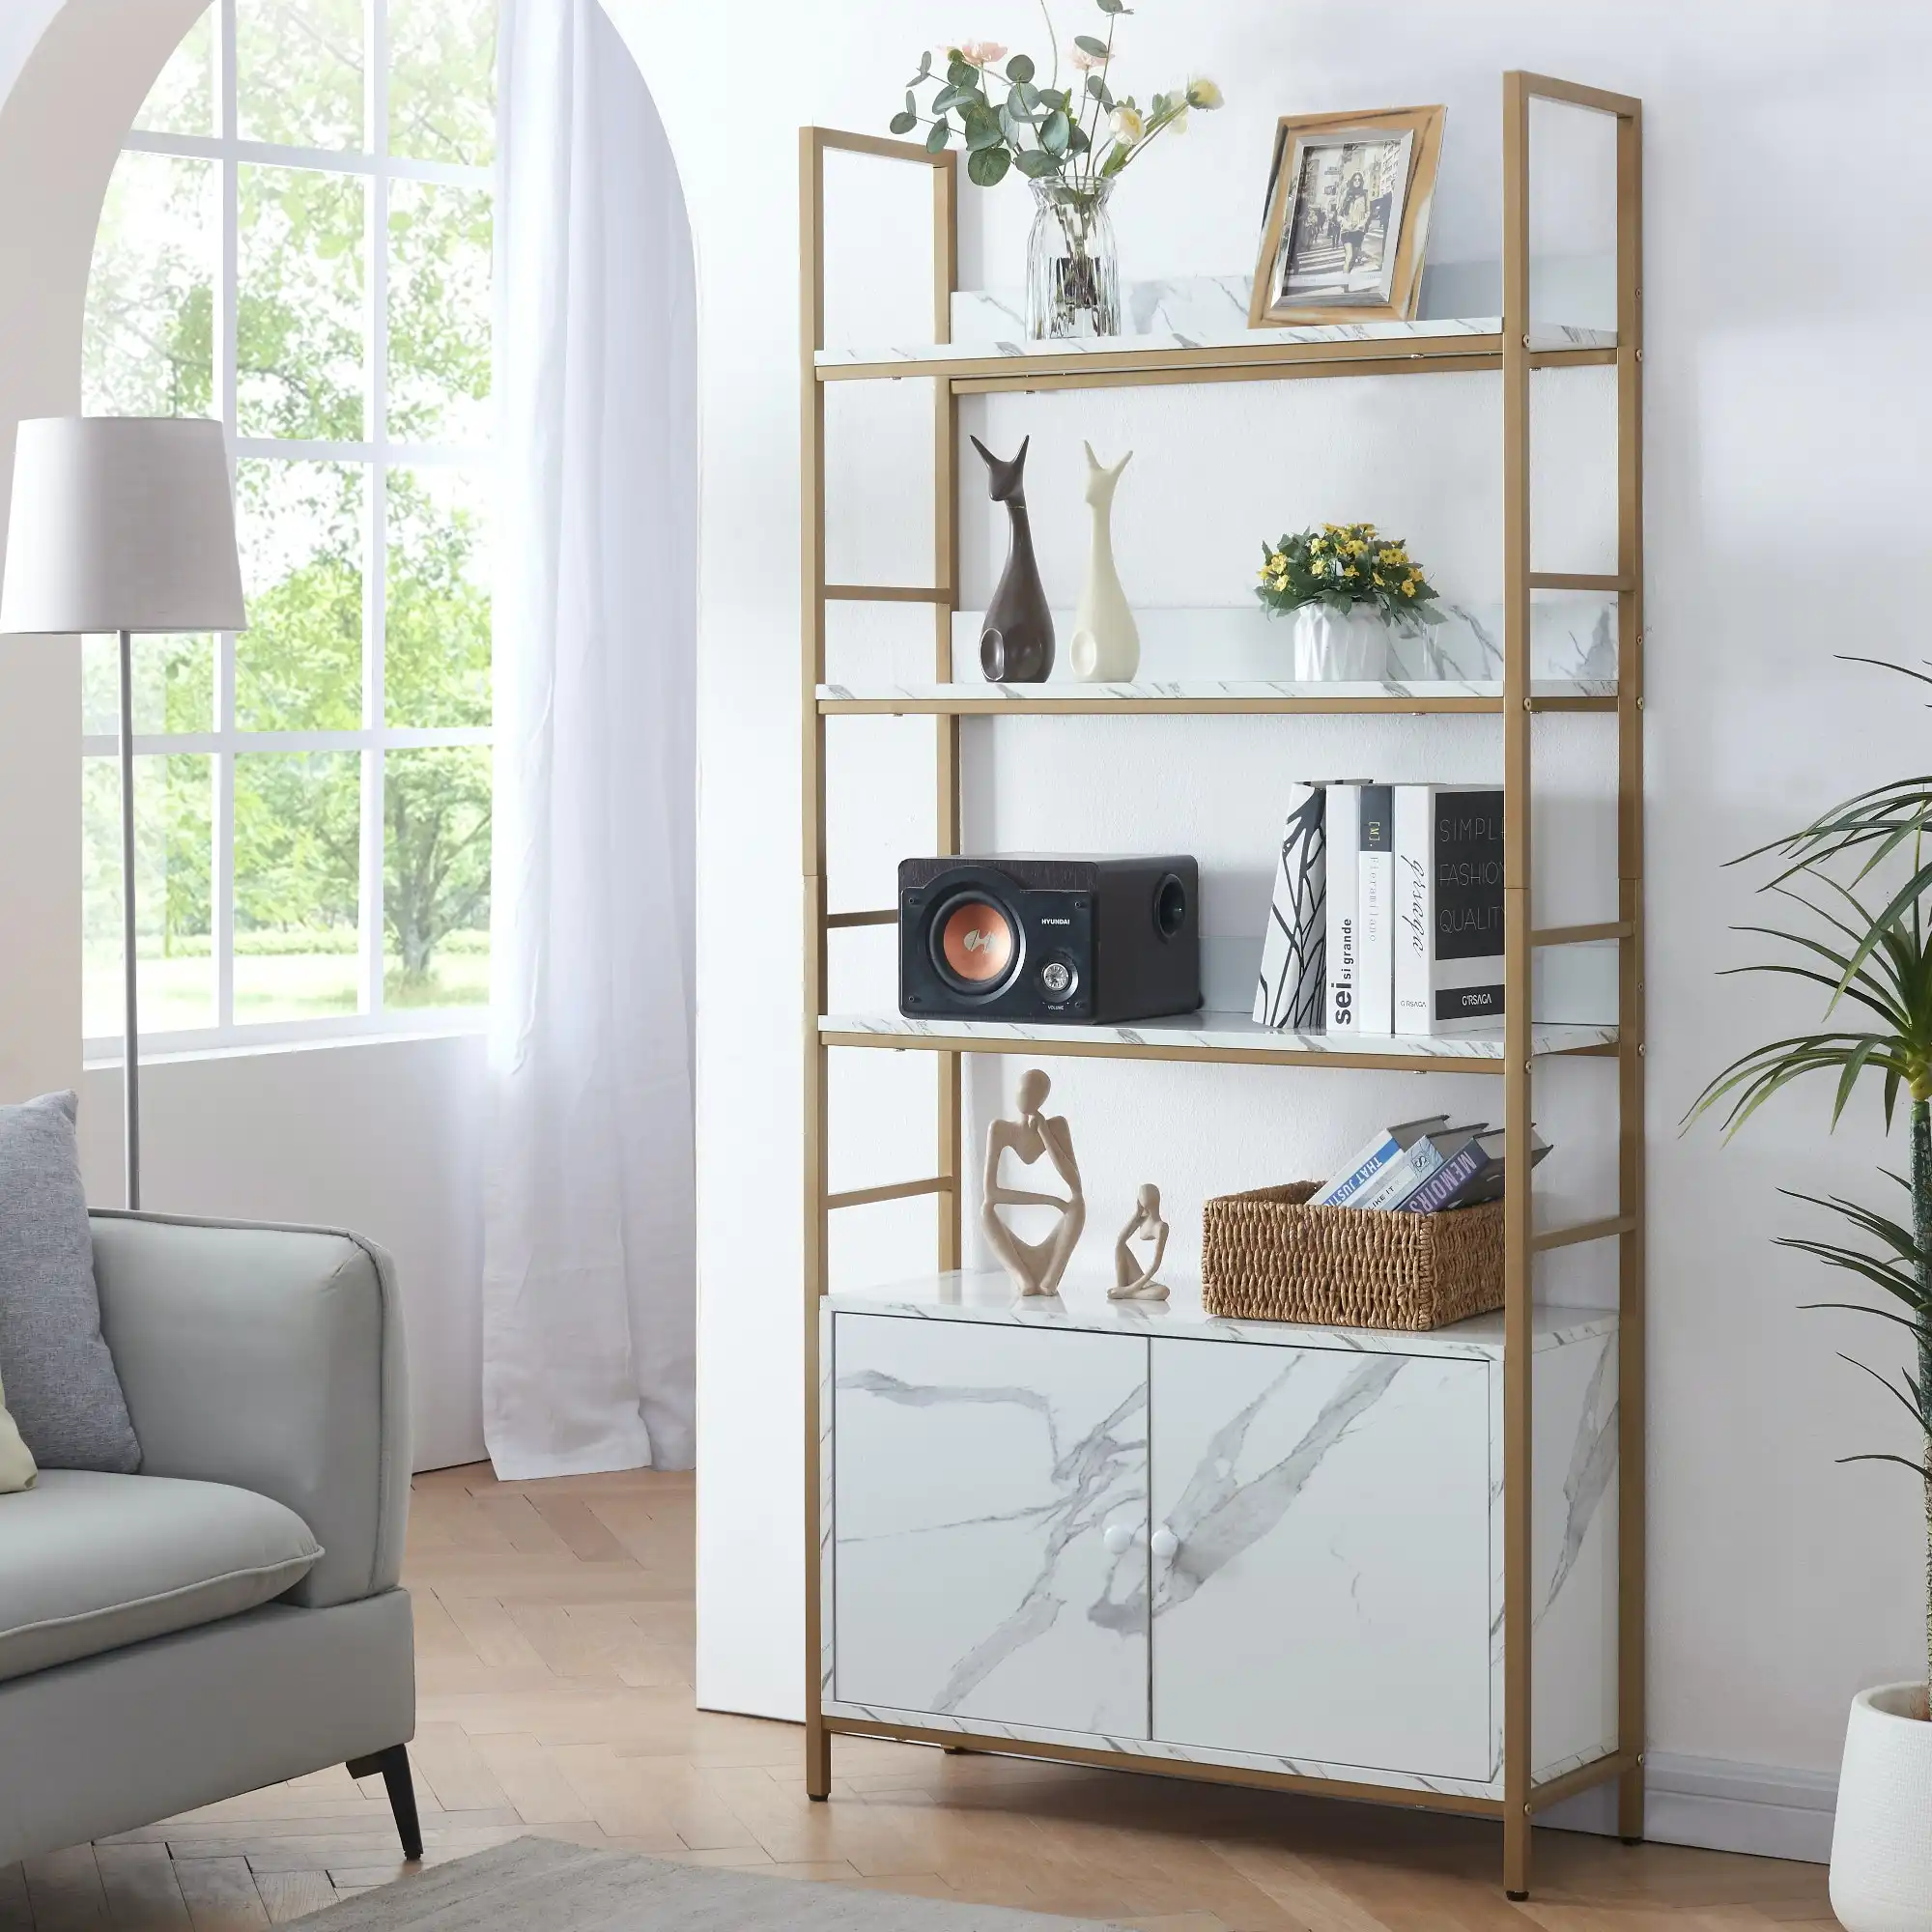 HLIVING 5 Tier Bookshelf with 2 Cabinets, Marble White Look and Gold Bookshelf with Doors,White